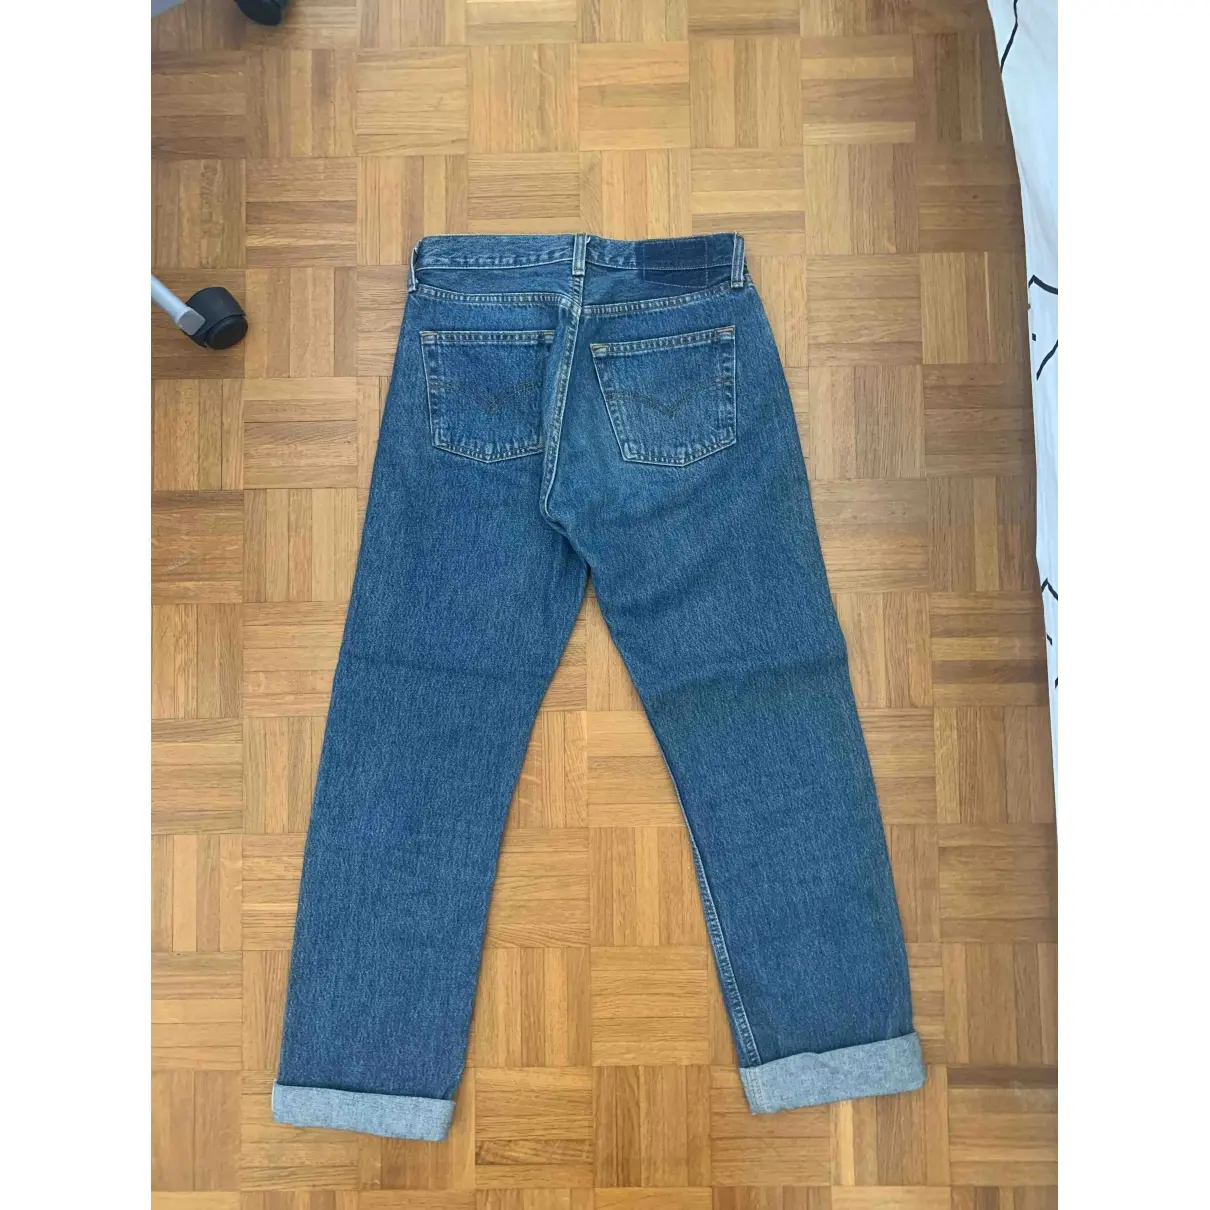 Dress Gallery Straight jeans for sale